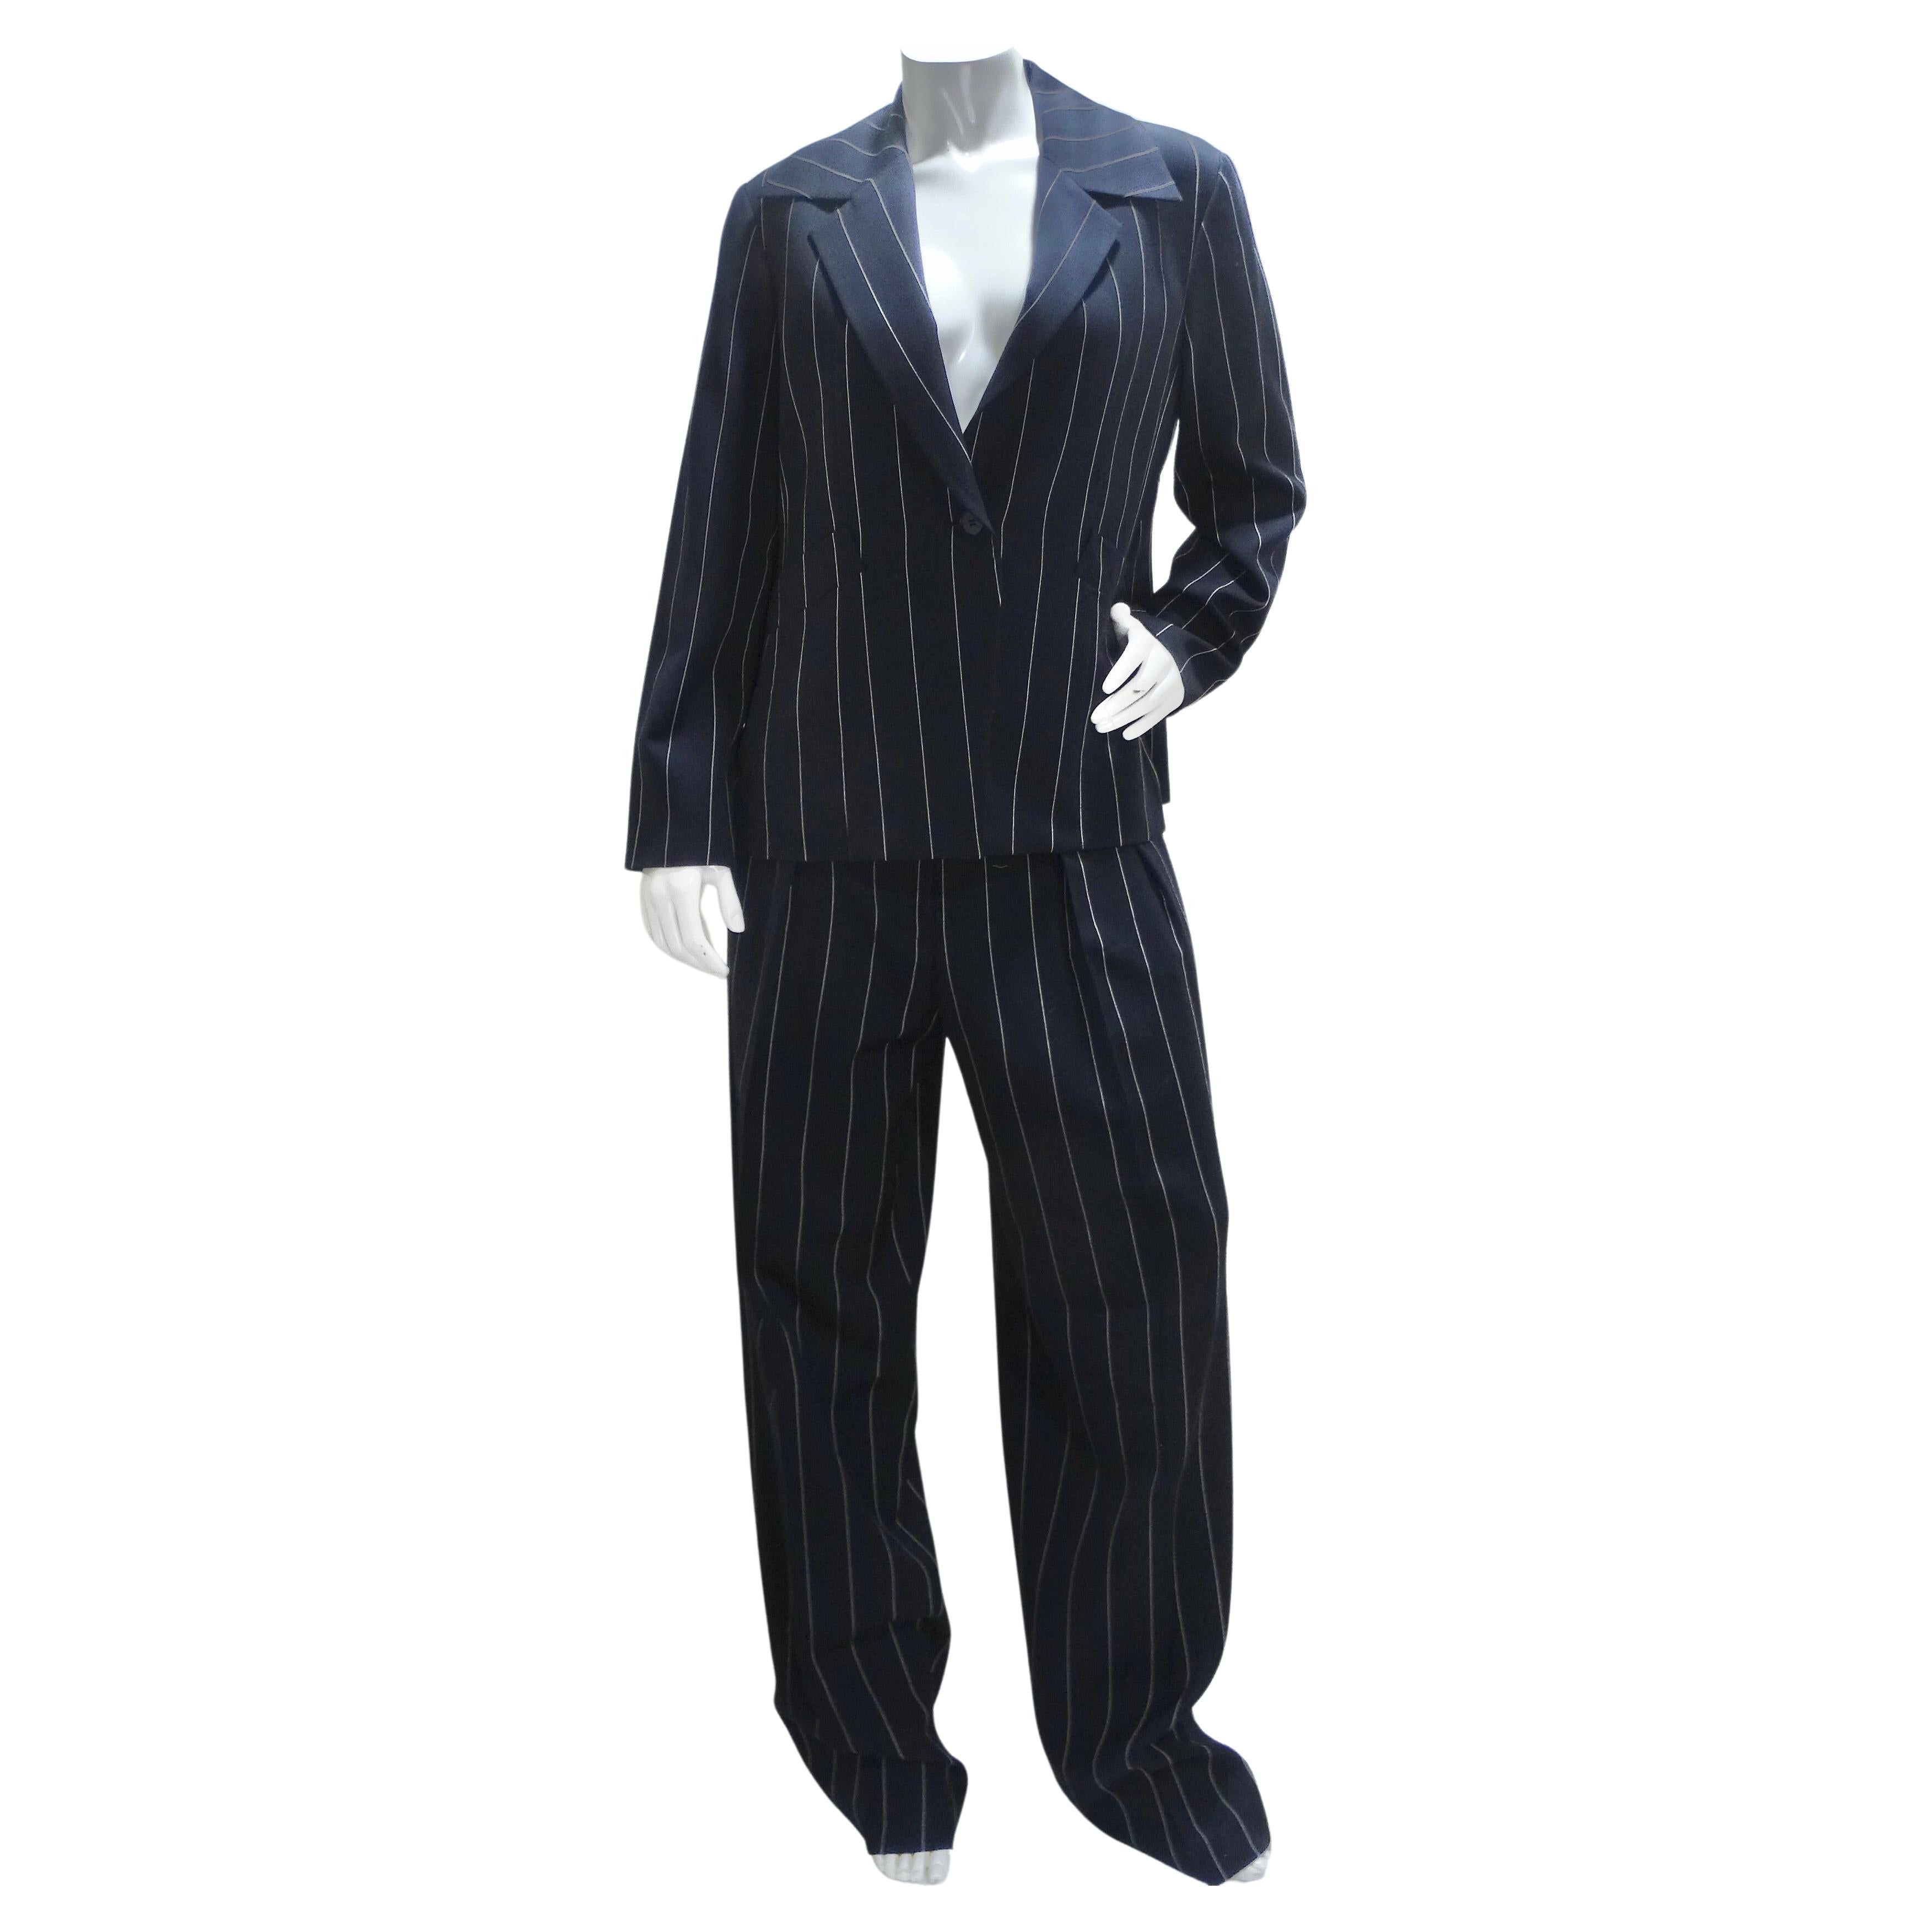 Christian Dior 1990s Navy Pinstripe Suit For Sale